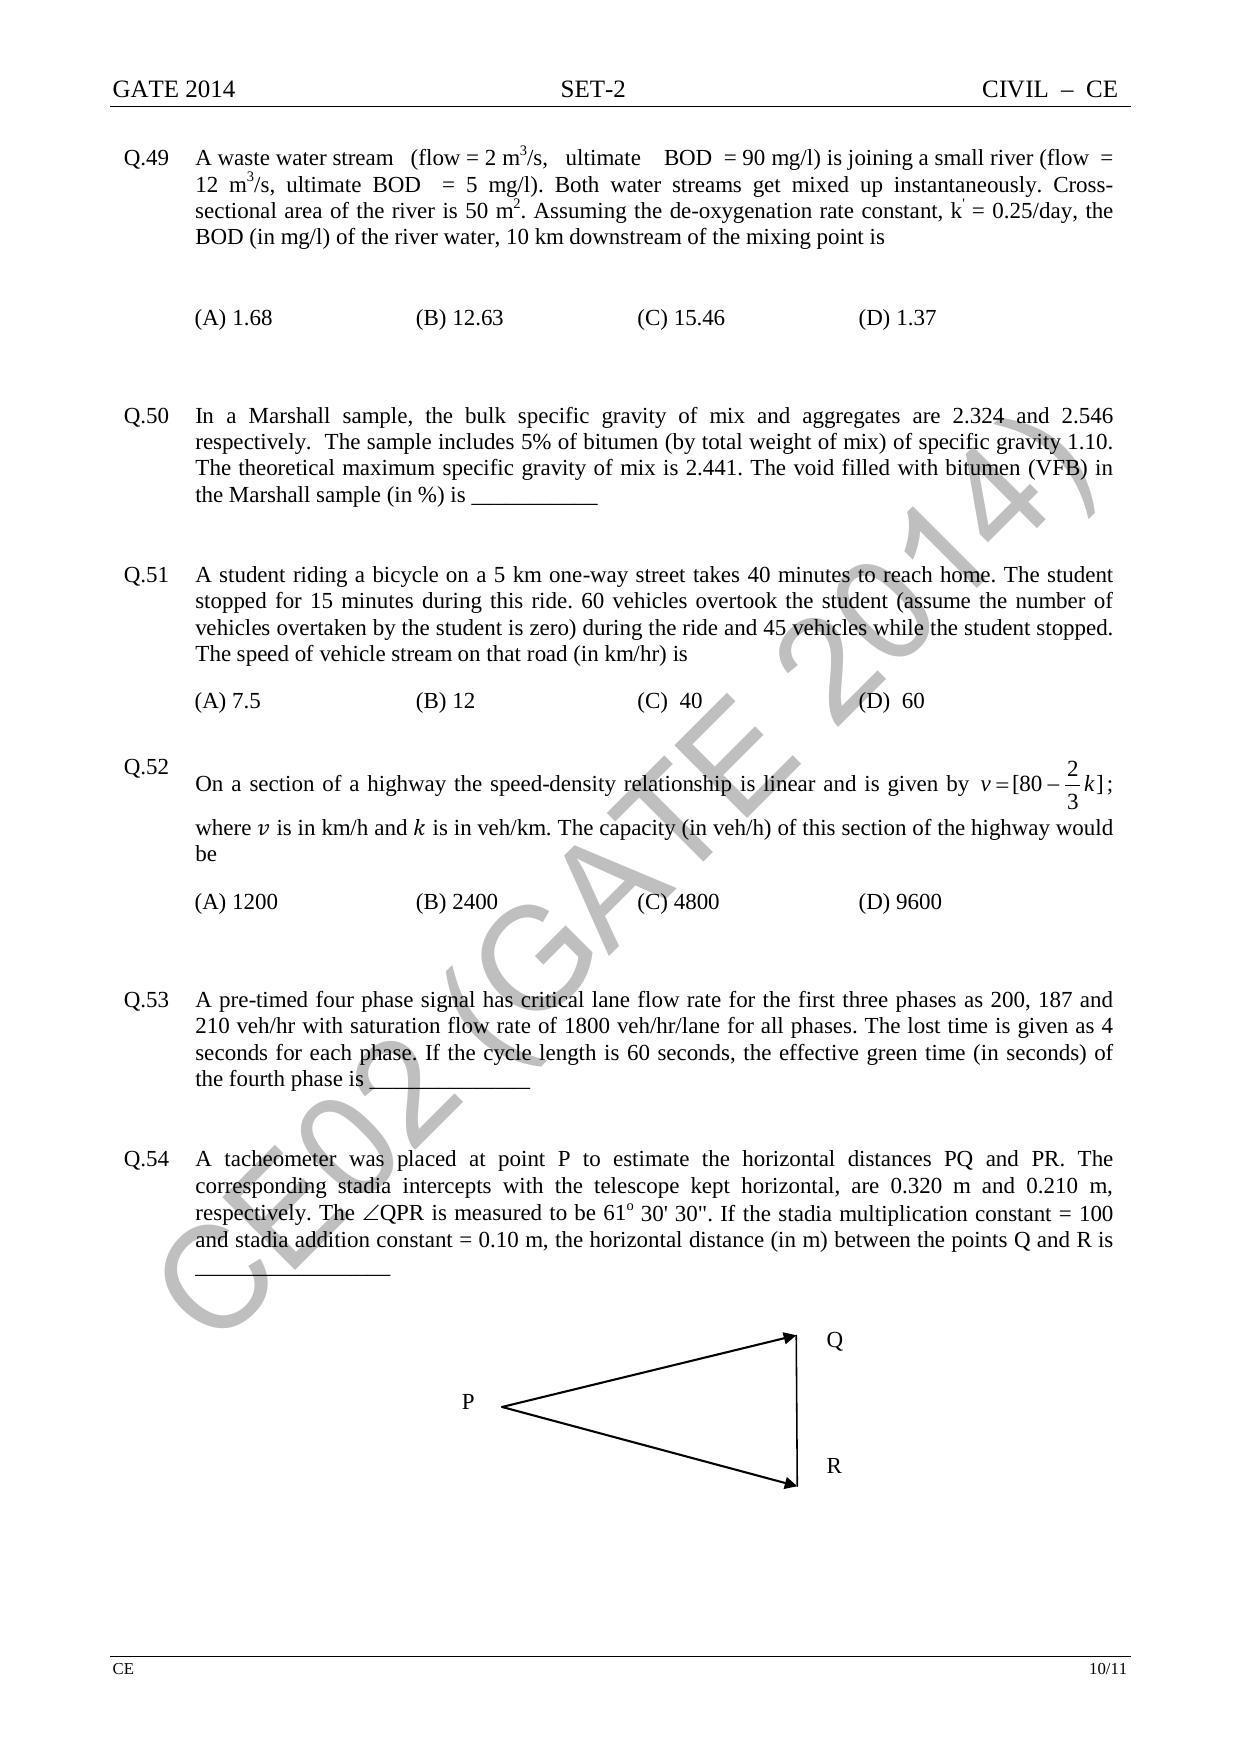 GATE 2014 Civil Engineering (CE) Question Paper with Answer Key - Page 38